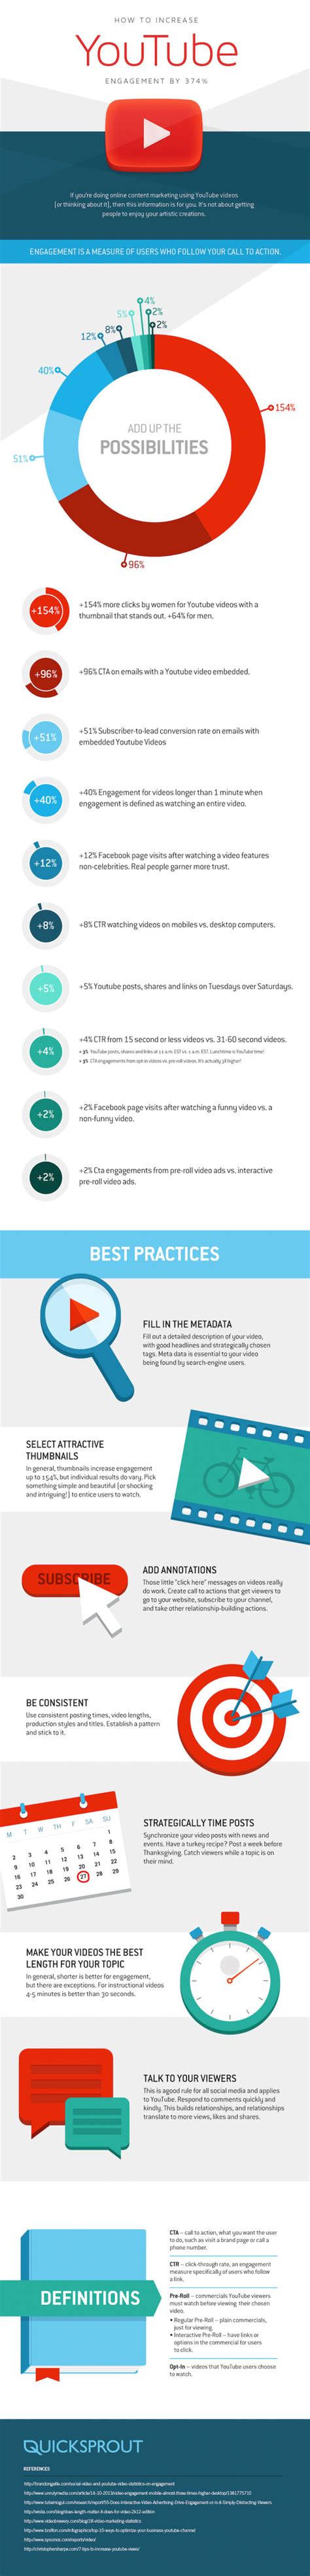 increase youtube engagement rapidly infographic business